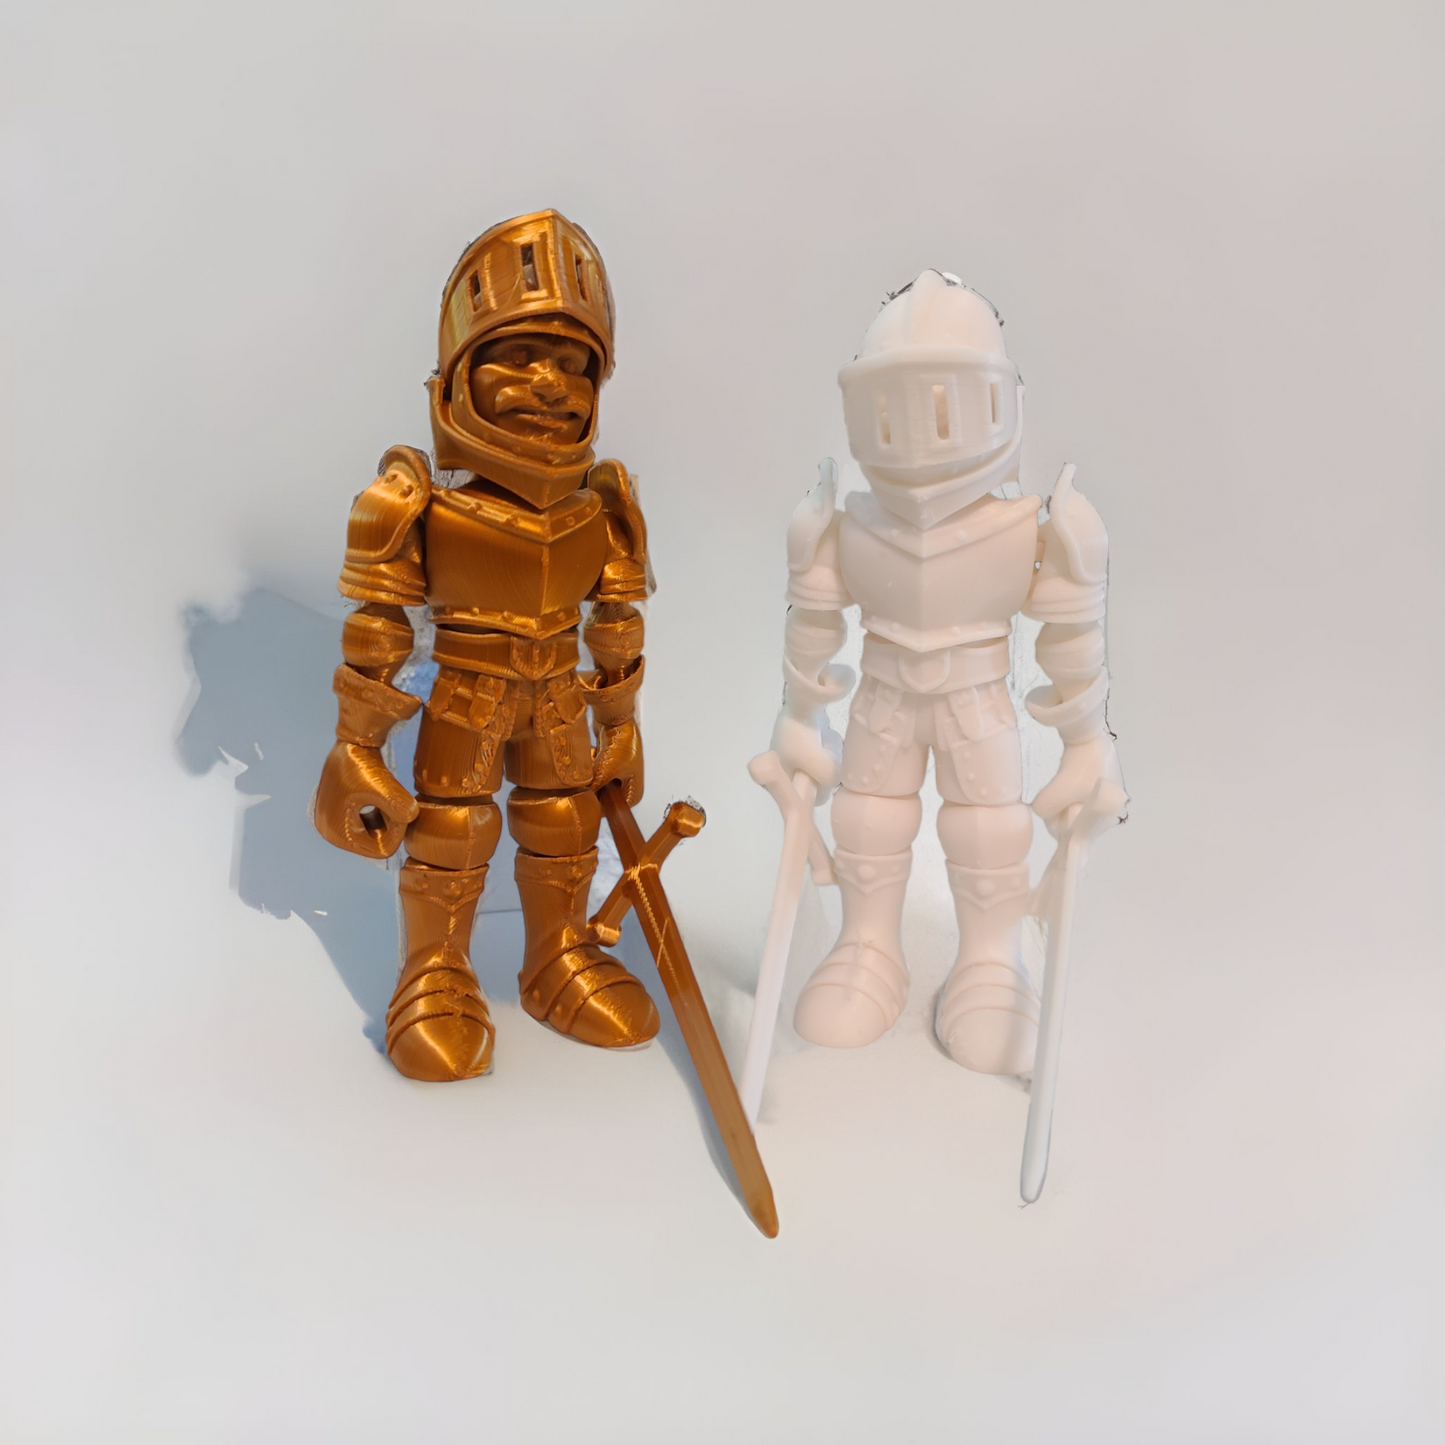 3d print Knight and sword for a child, Easter basket stuffer for kids, birthday gift for husband, Medieval lover gift, teenager gift